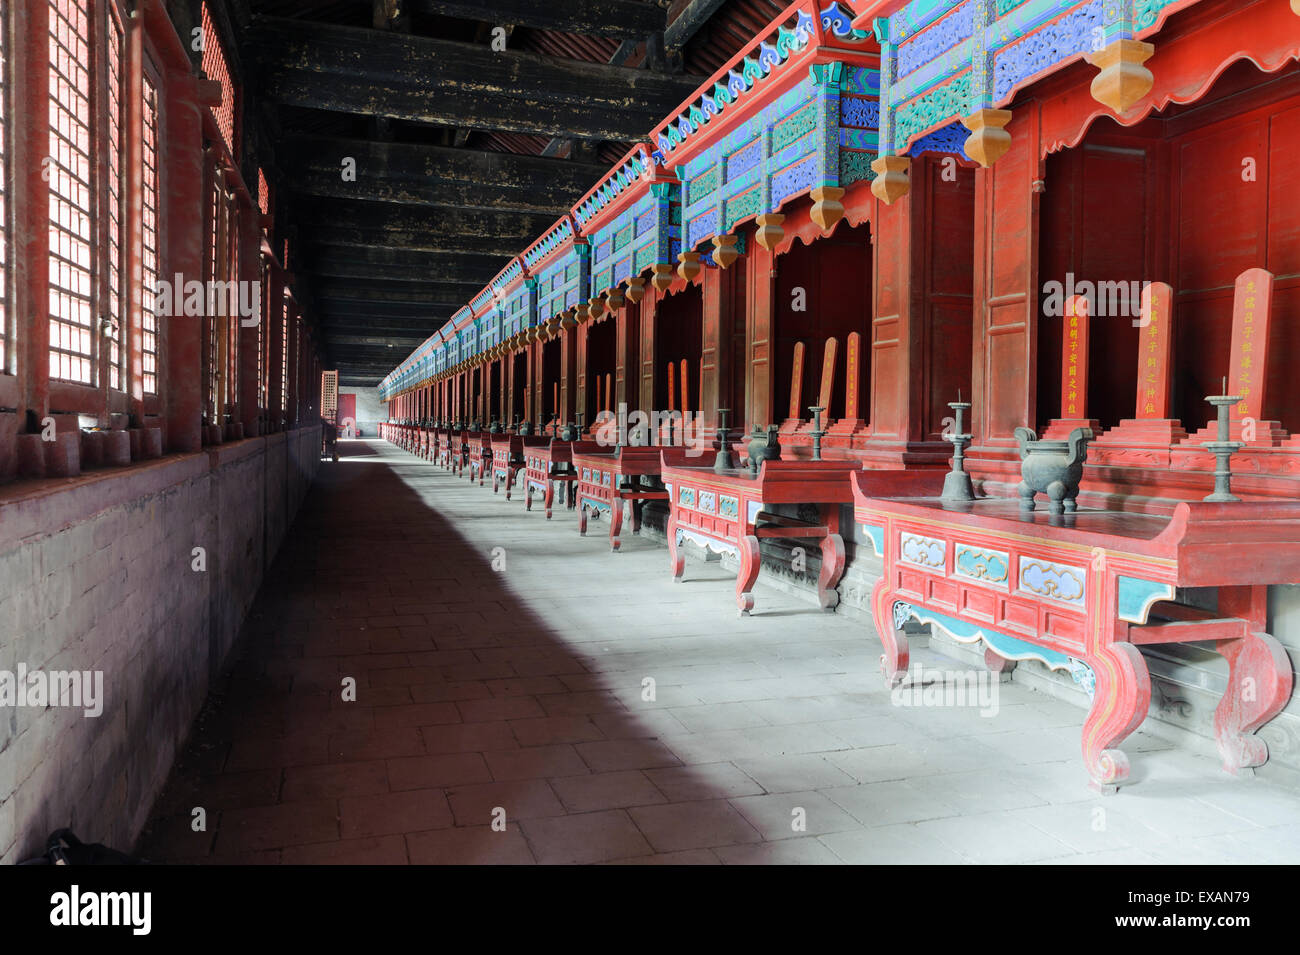 Confucius Temple altars in an adjacent building next to temple. Stock Photo